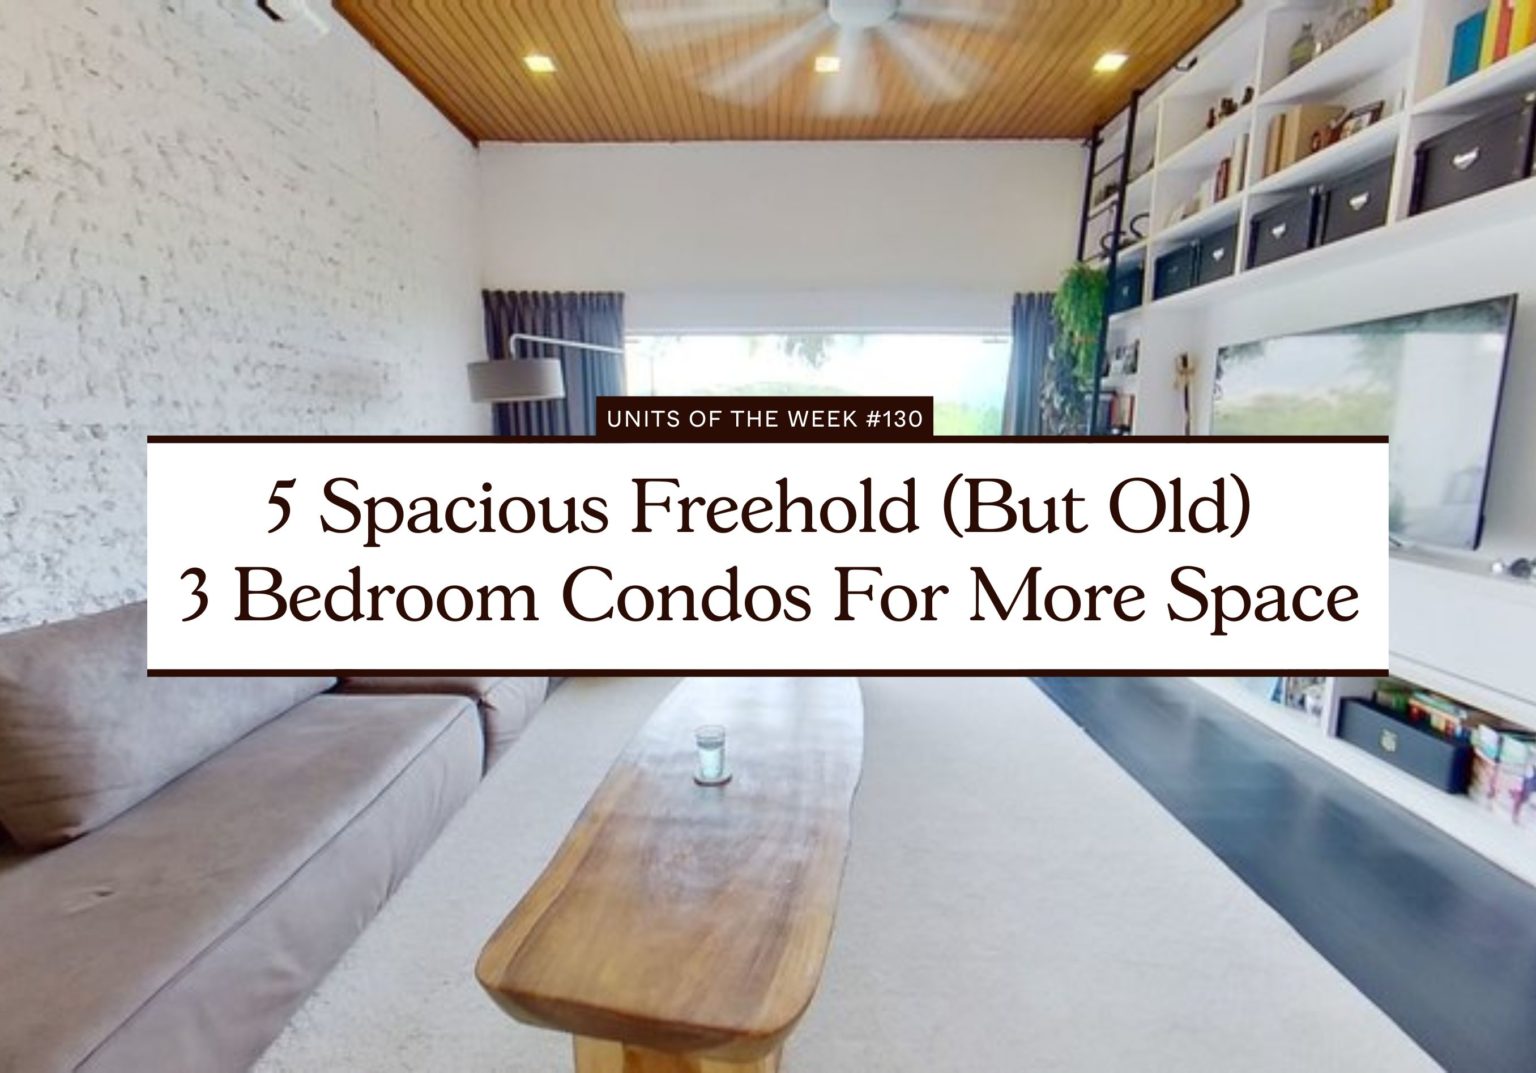 5 Spacious Freehold But Old 3 Bedroom Condos For More Space